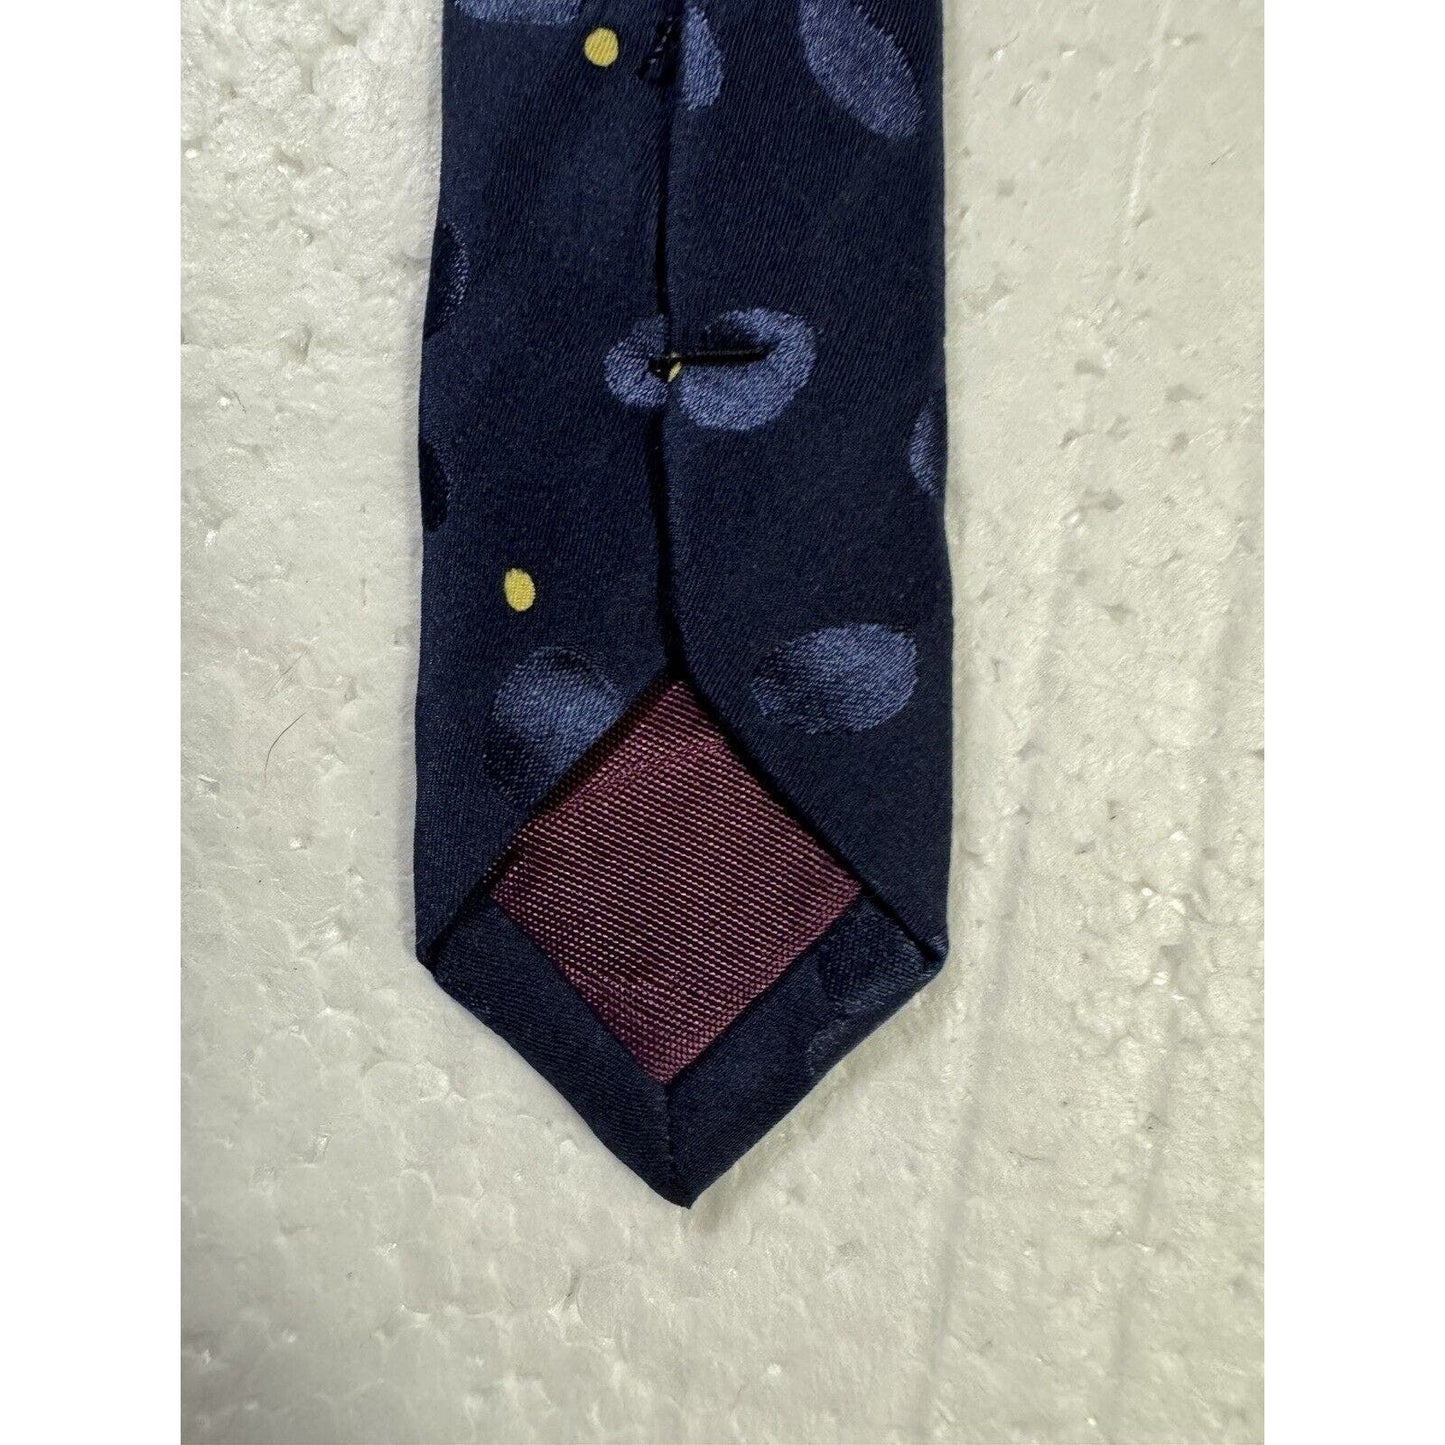 The Disney Store Mickey Mouse Classic Car Driving Palm Tree Novelty Necktie